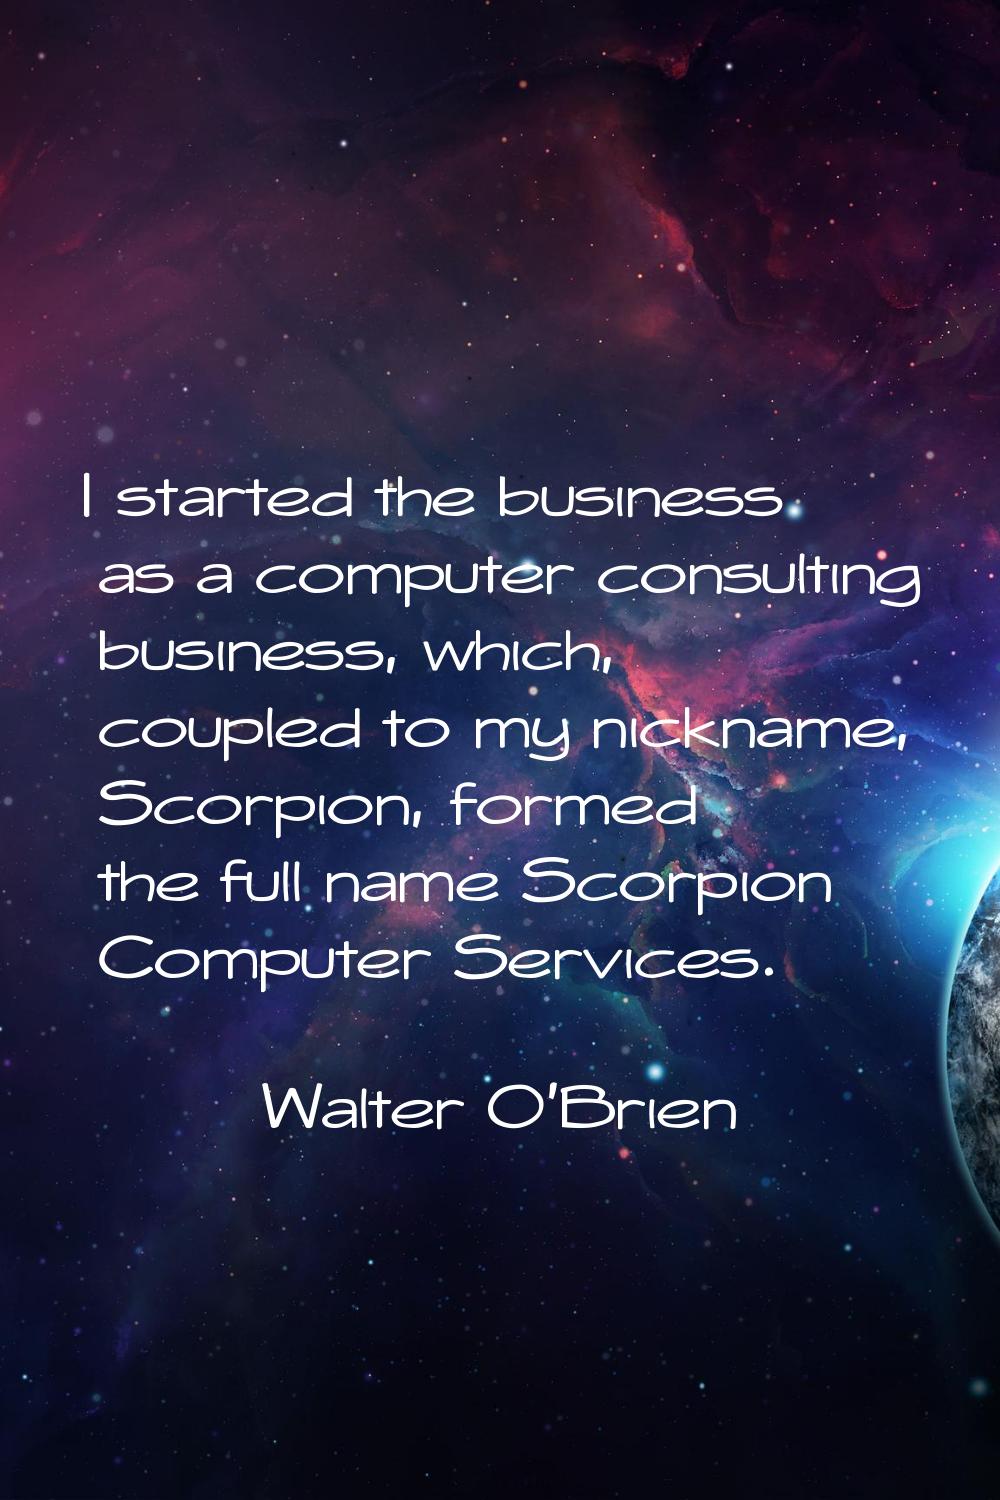 I started the business as a computer consulting business, which, coupled to my nickname, Scorpion, 